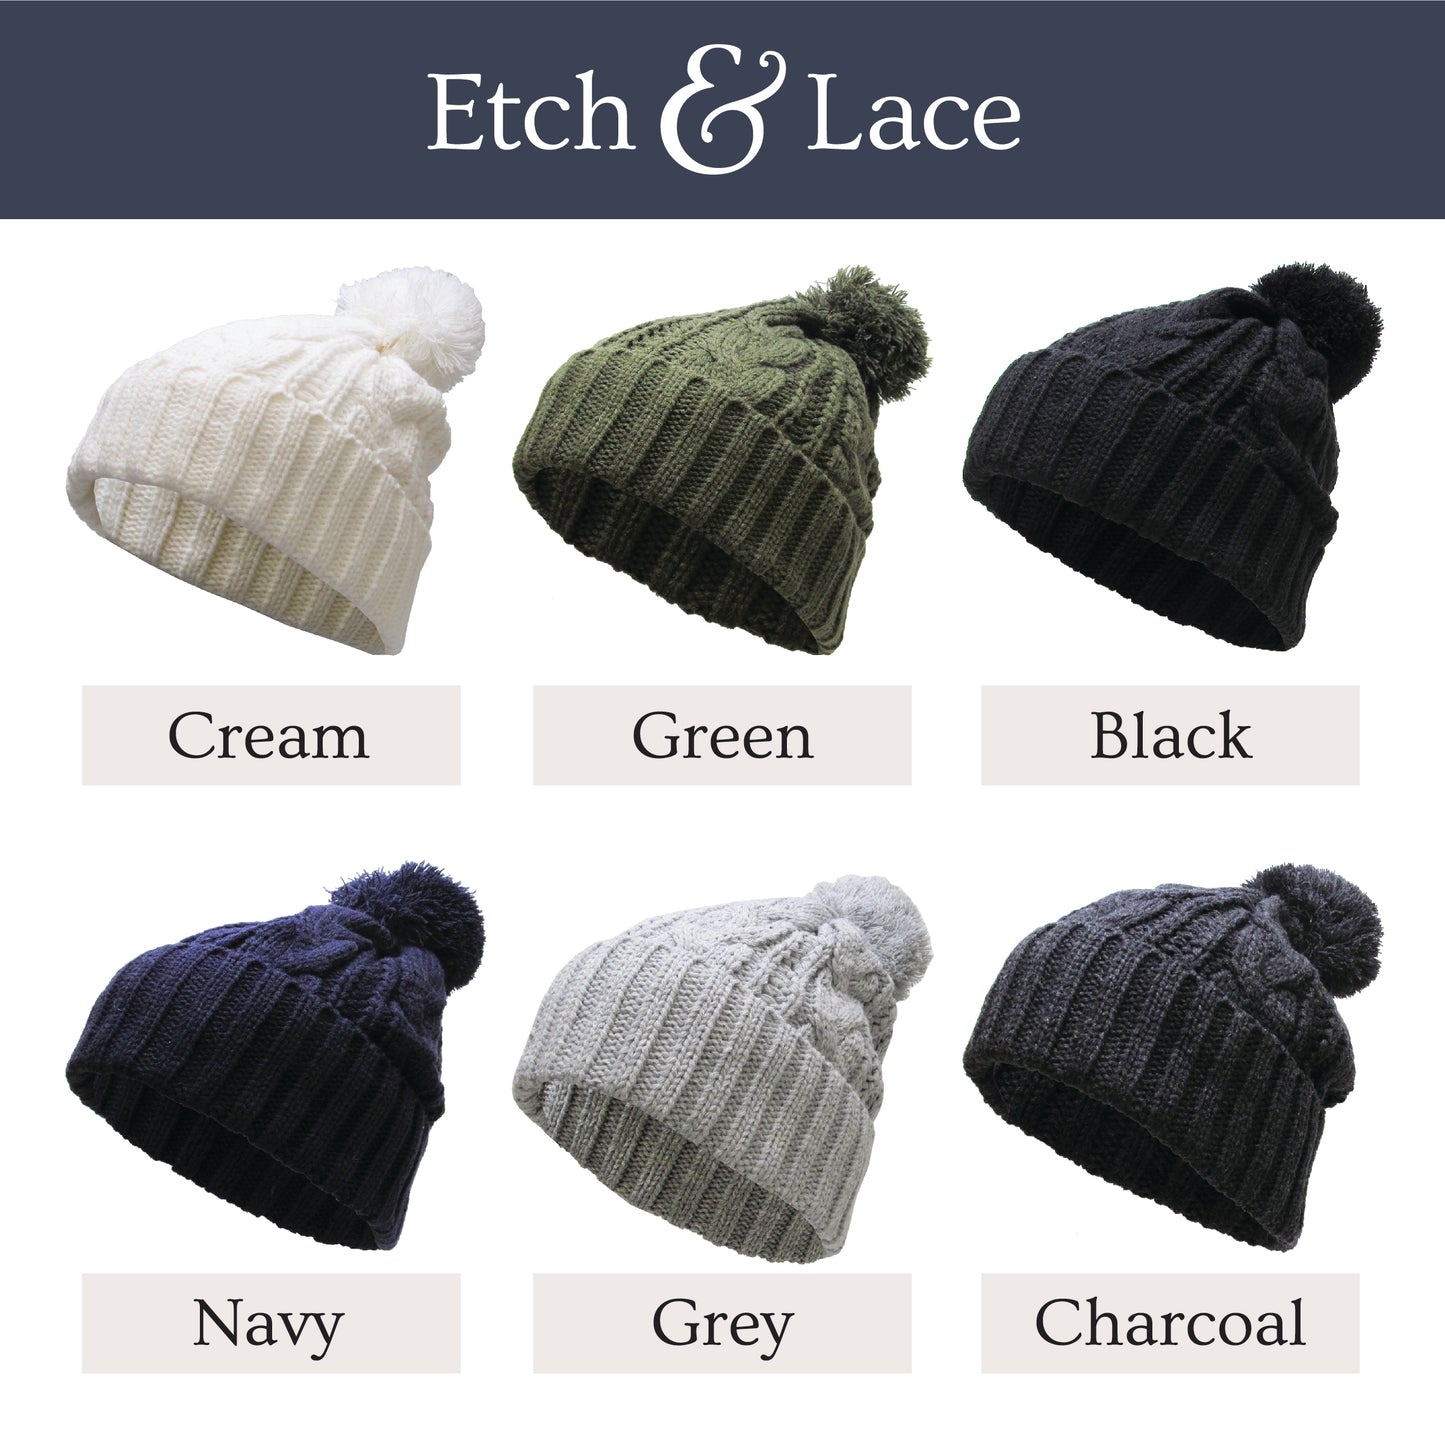 Customizable Pom Cable Knit Beanies - Add Your Personalized Touch